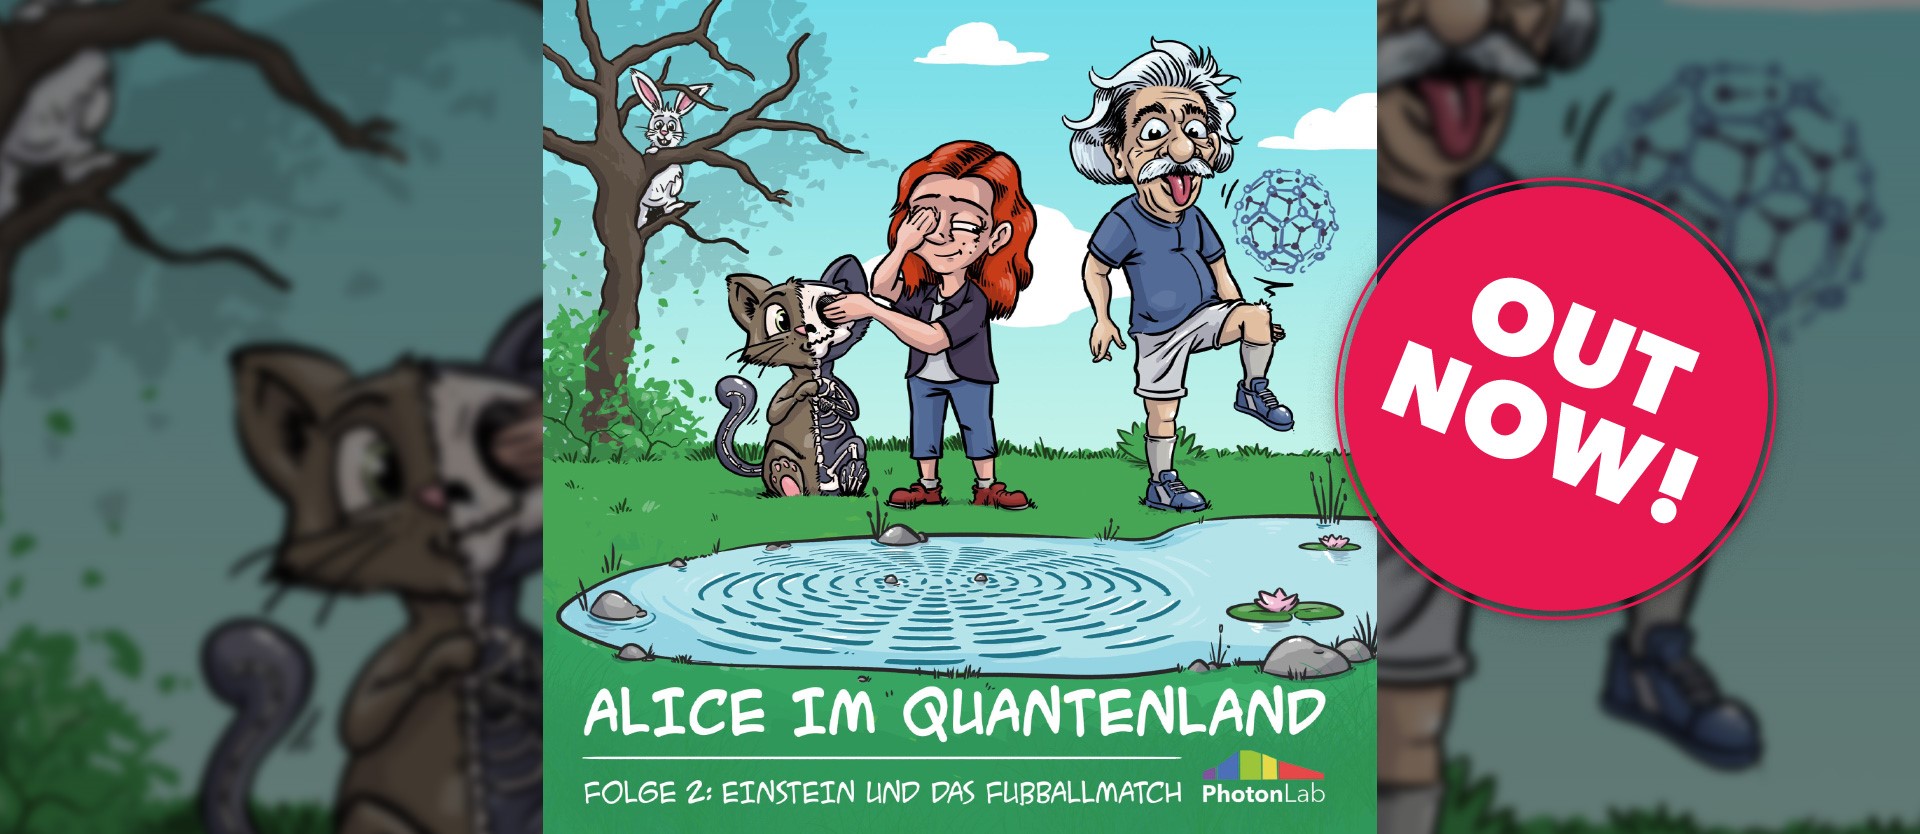 Alice in Quantum Land: "Einstein and the soccer match"